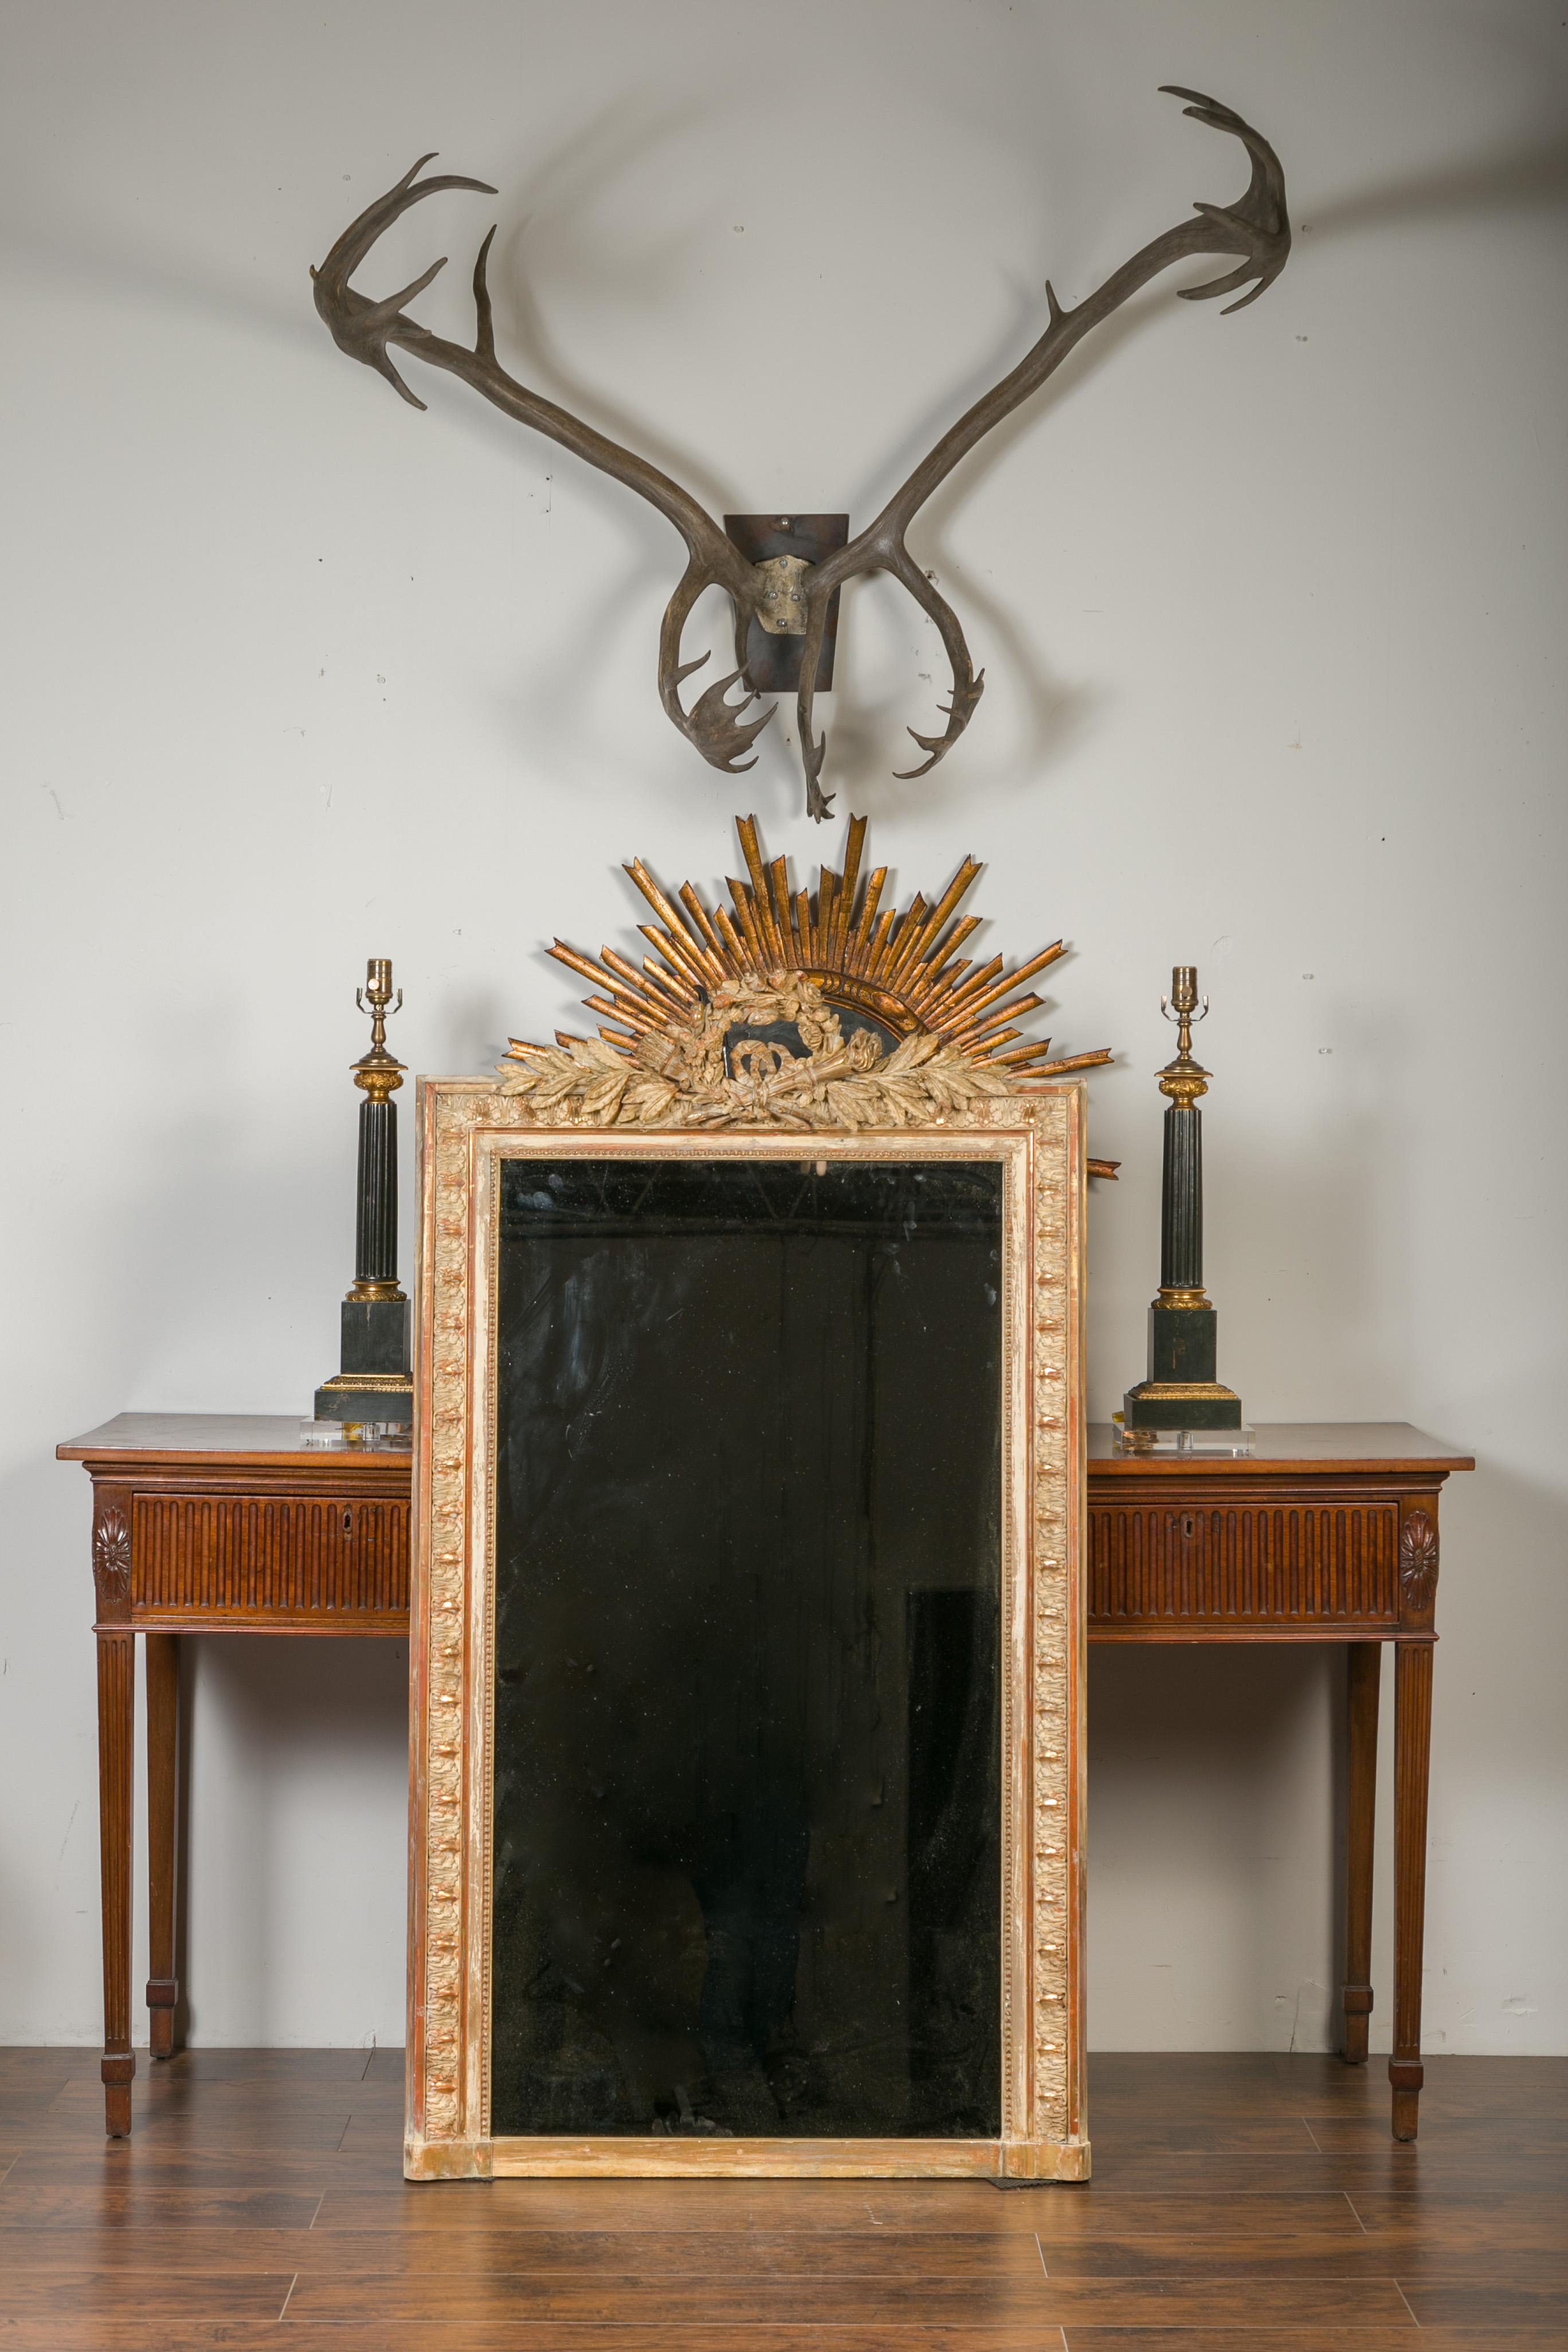 A French gilt and painted carved wooden mirror from the late 19th century, with floral wreath, torch and quiver motifs. Born in France during the last quarter of the 19th century, this tall mirror features an eye-catching crest adorned with a carved